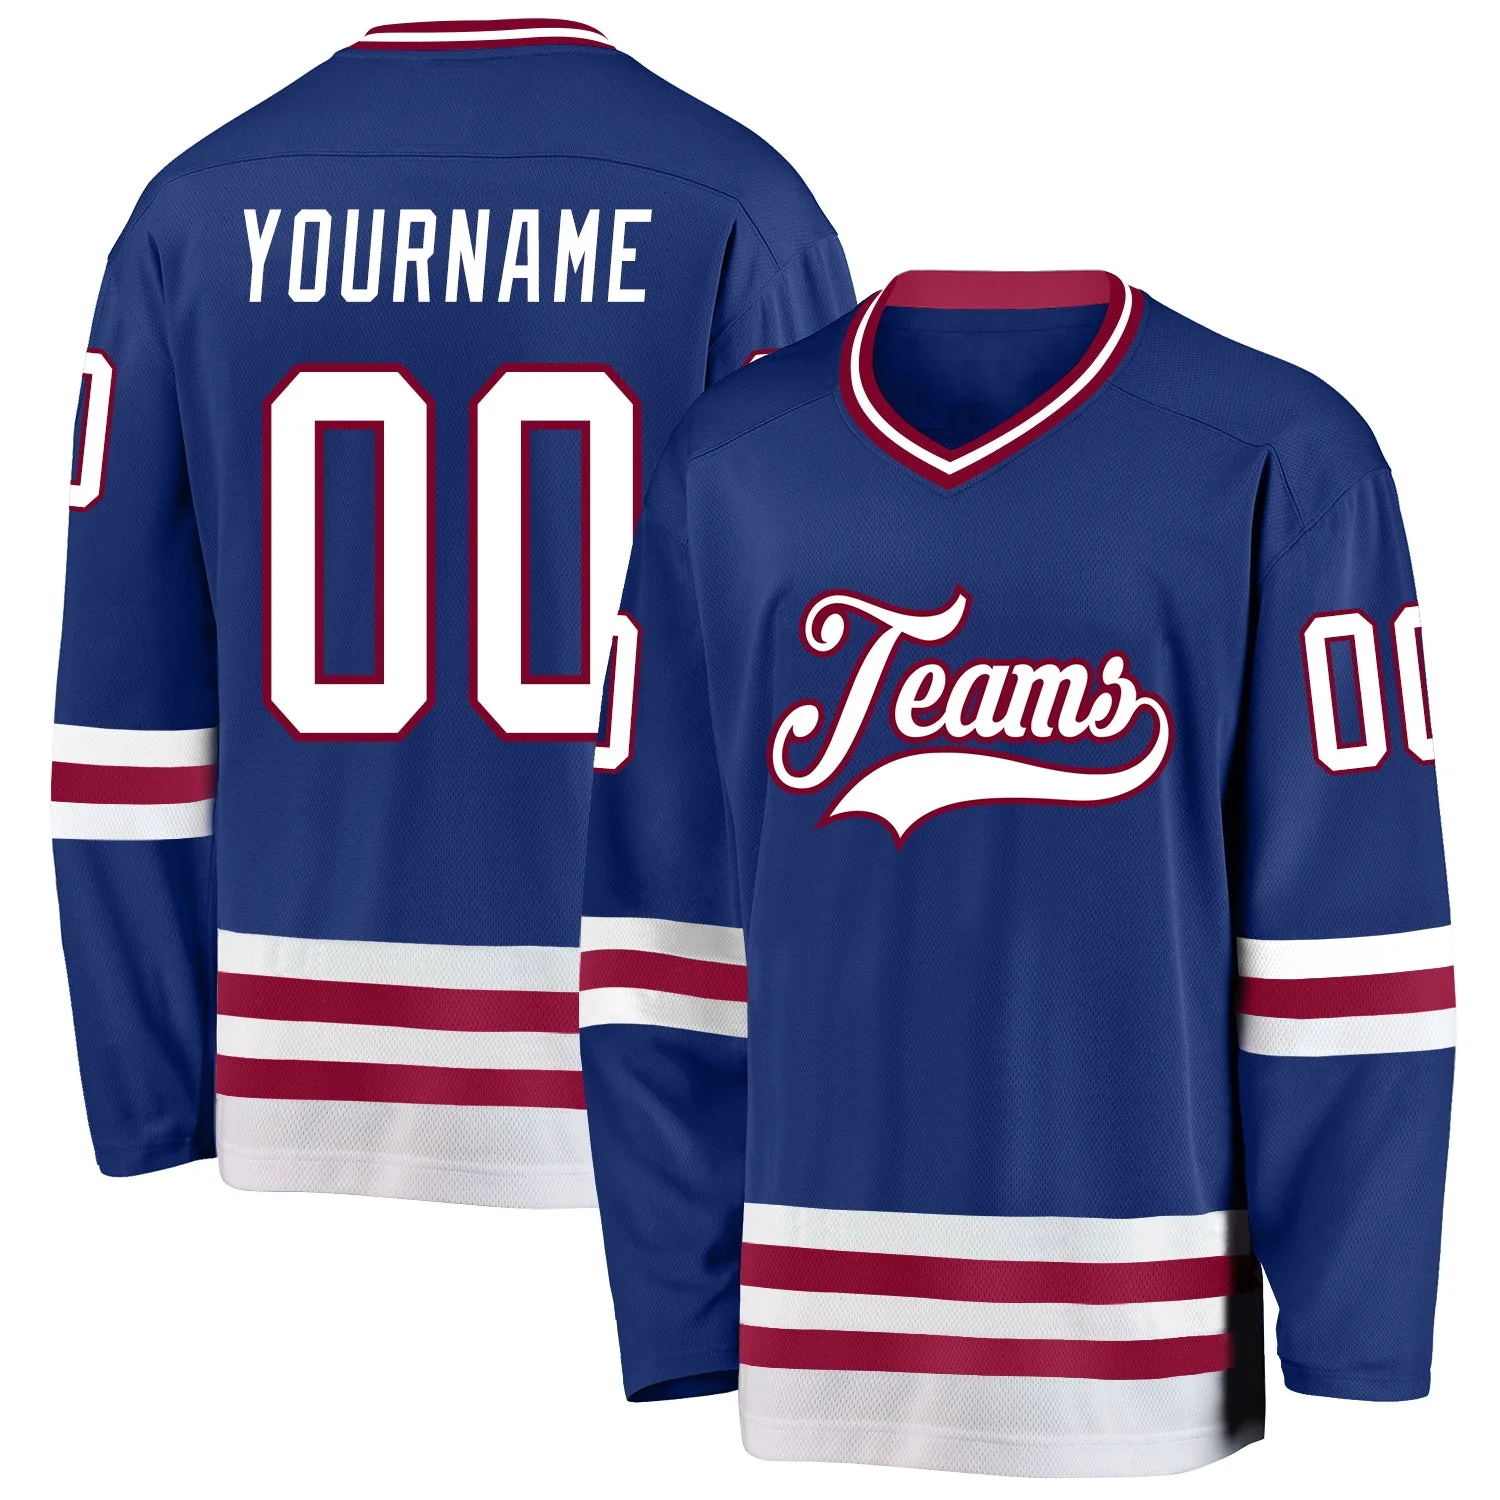 Stitched And Print Royal White-maroon Hockey Jersey Custom